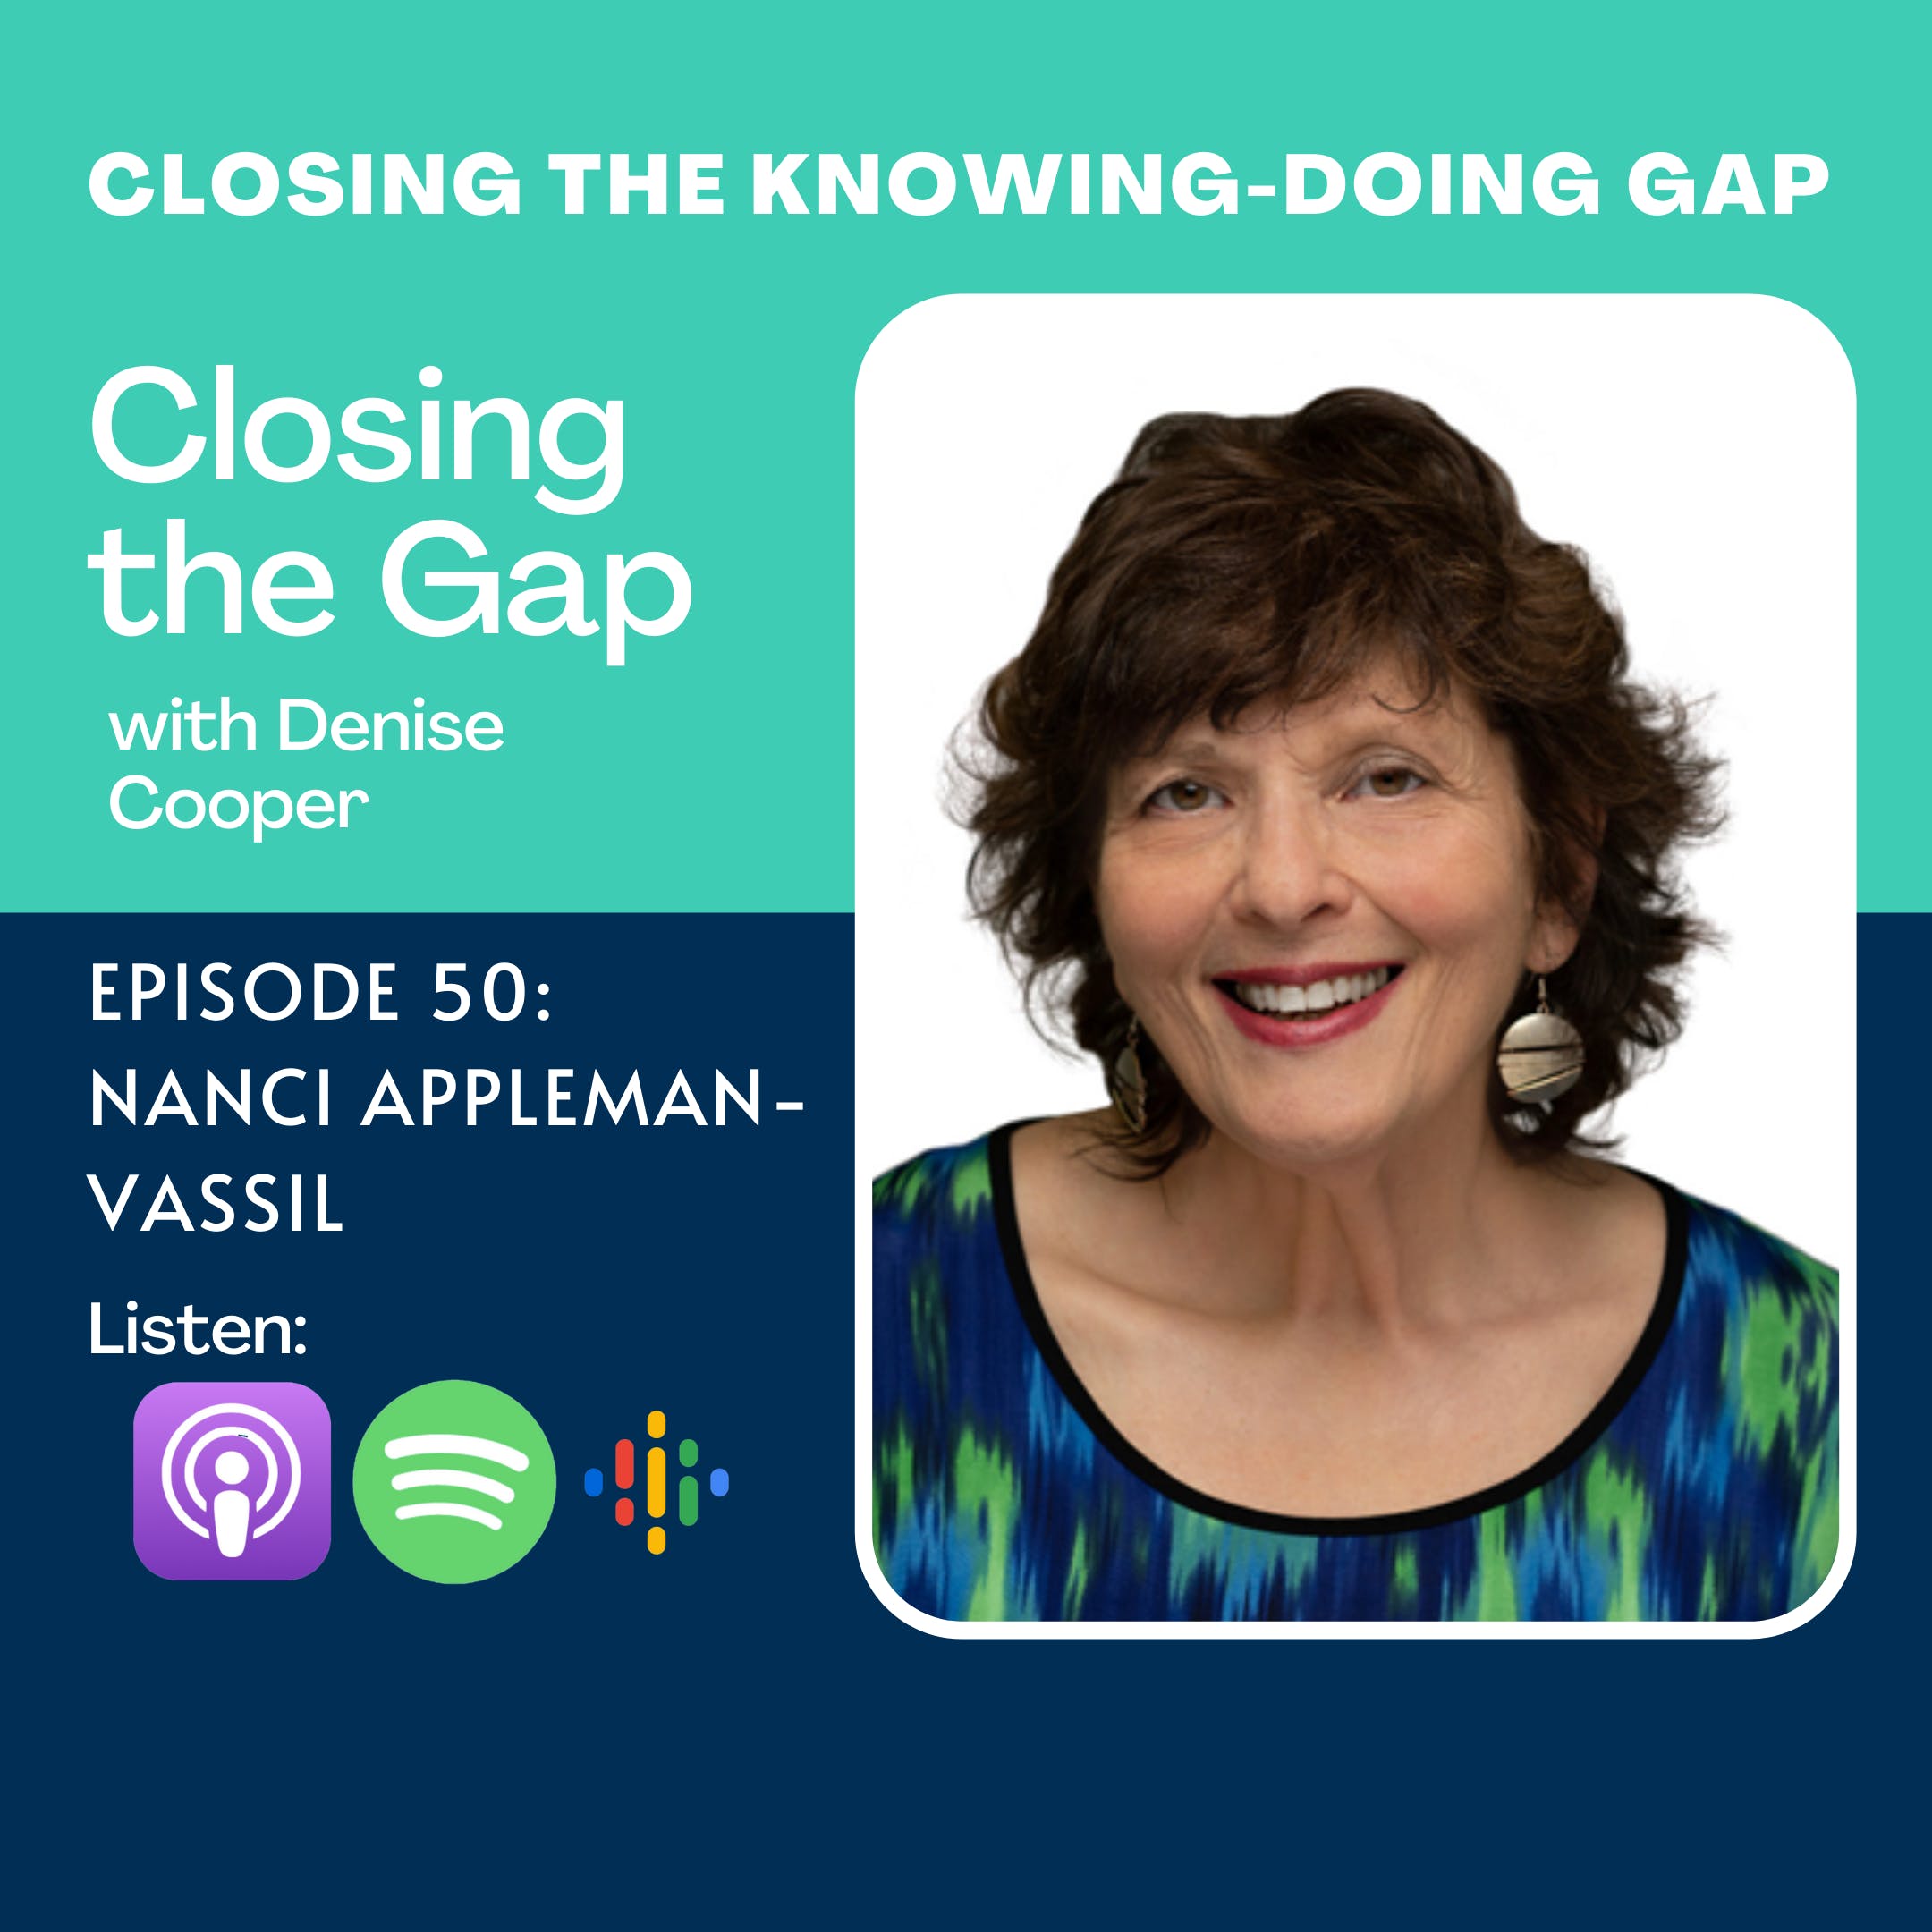 Episode 50: Closing the Knowing-Doing Gap with Nanci Appleman-Vassil